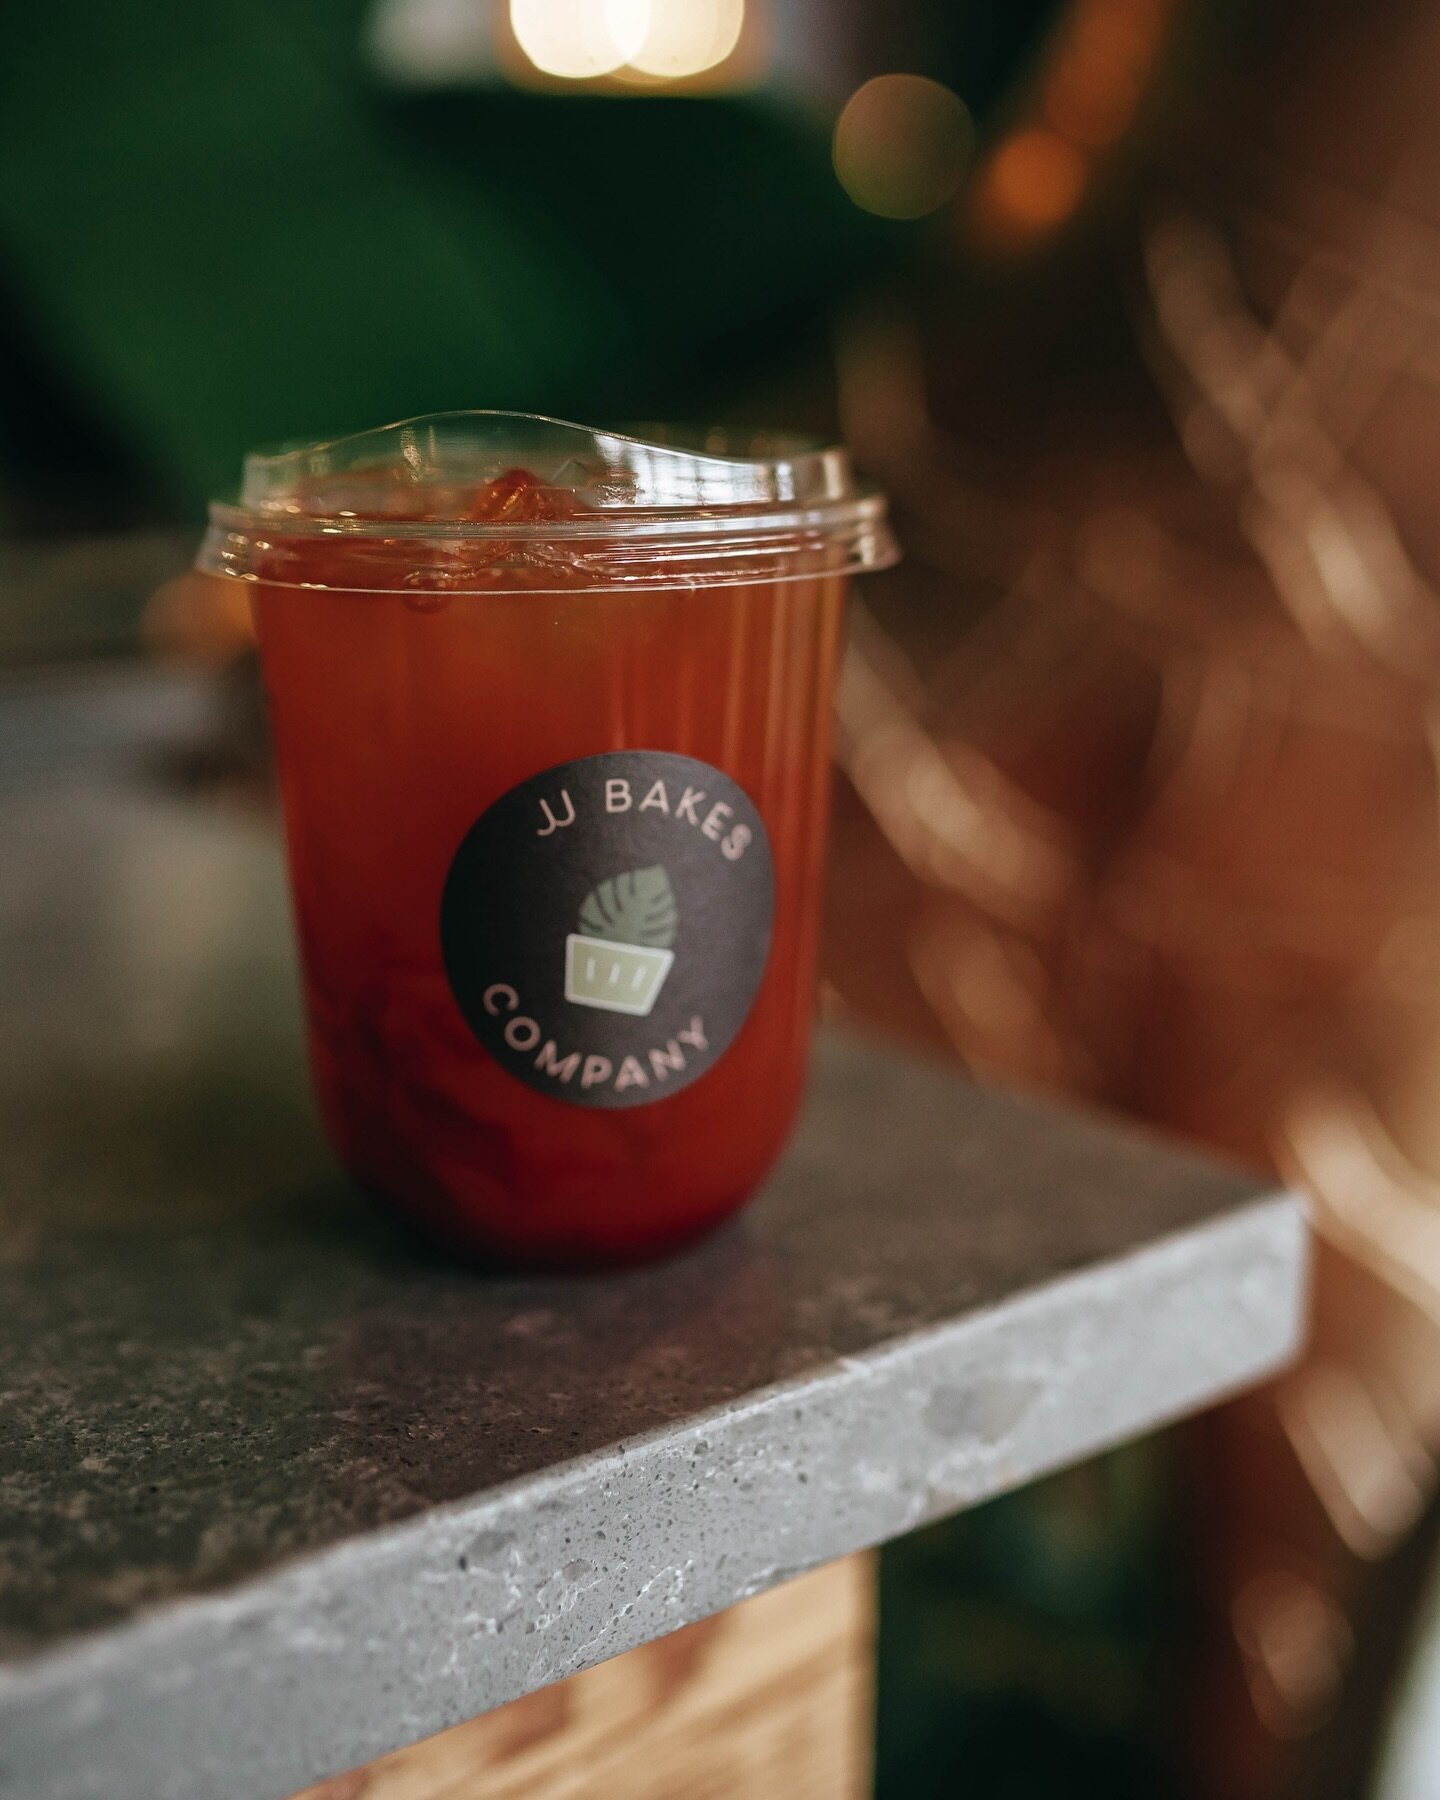 Have you tried our Raspberry Calamansi Black Tea Lemonade? It&rsquo;s only available until February 15th, so make sure you grab yours today! 
#coffeeshop #yvreats #bakery